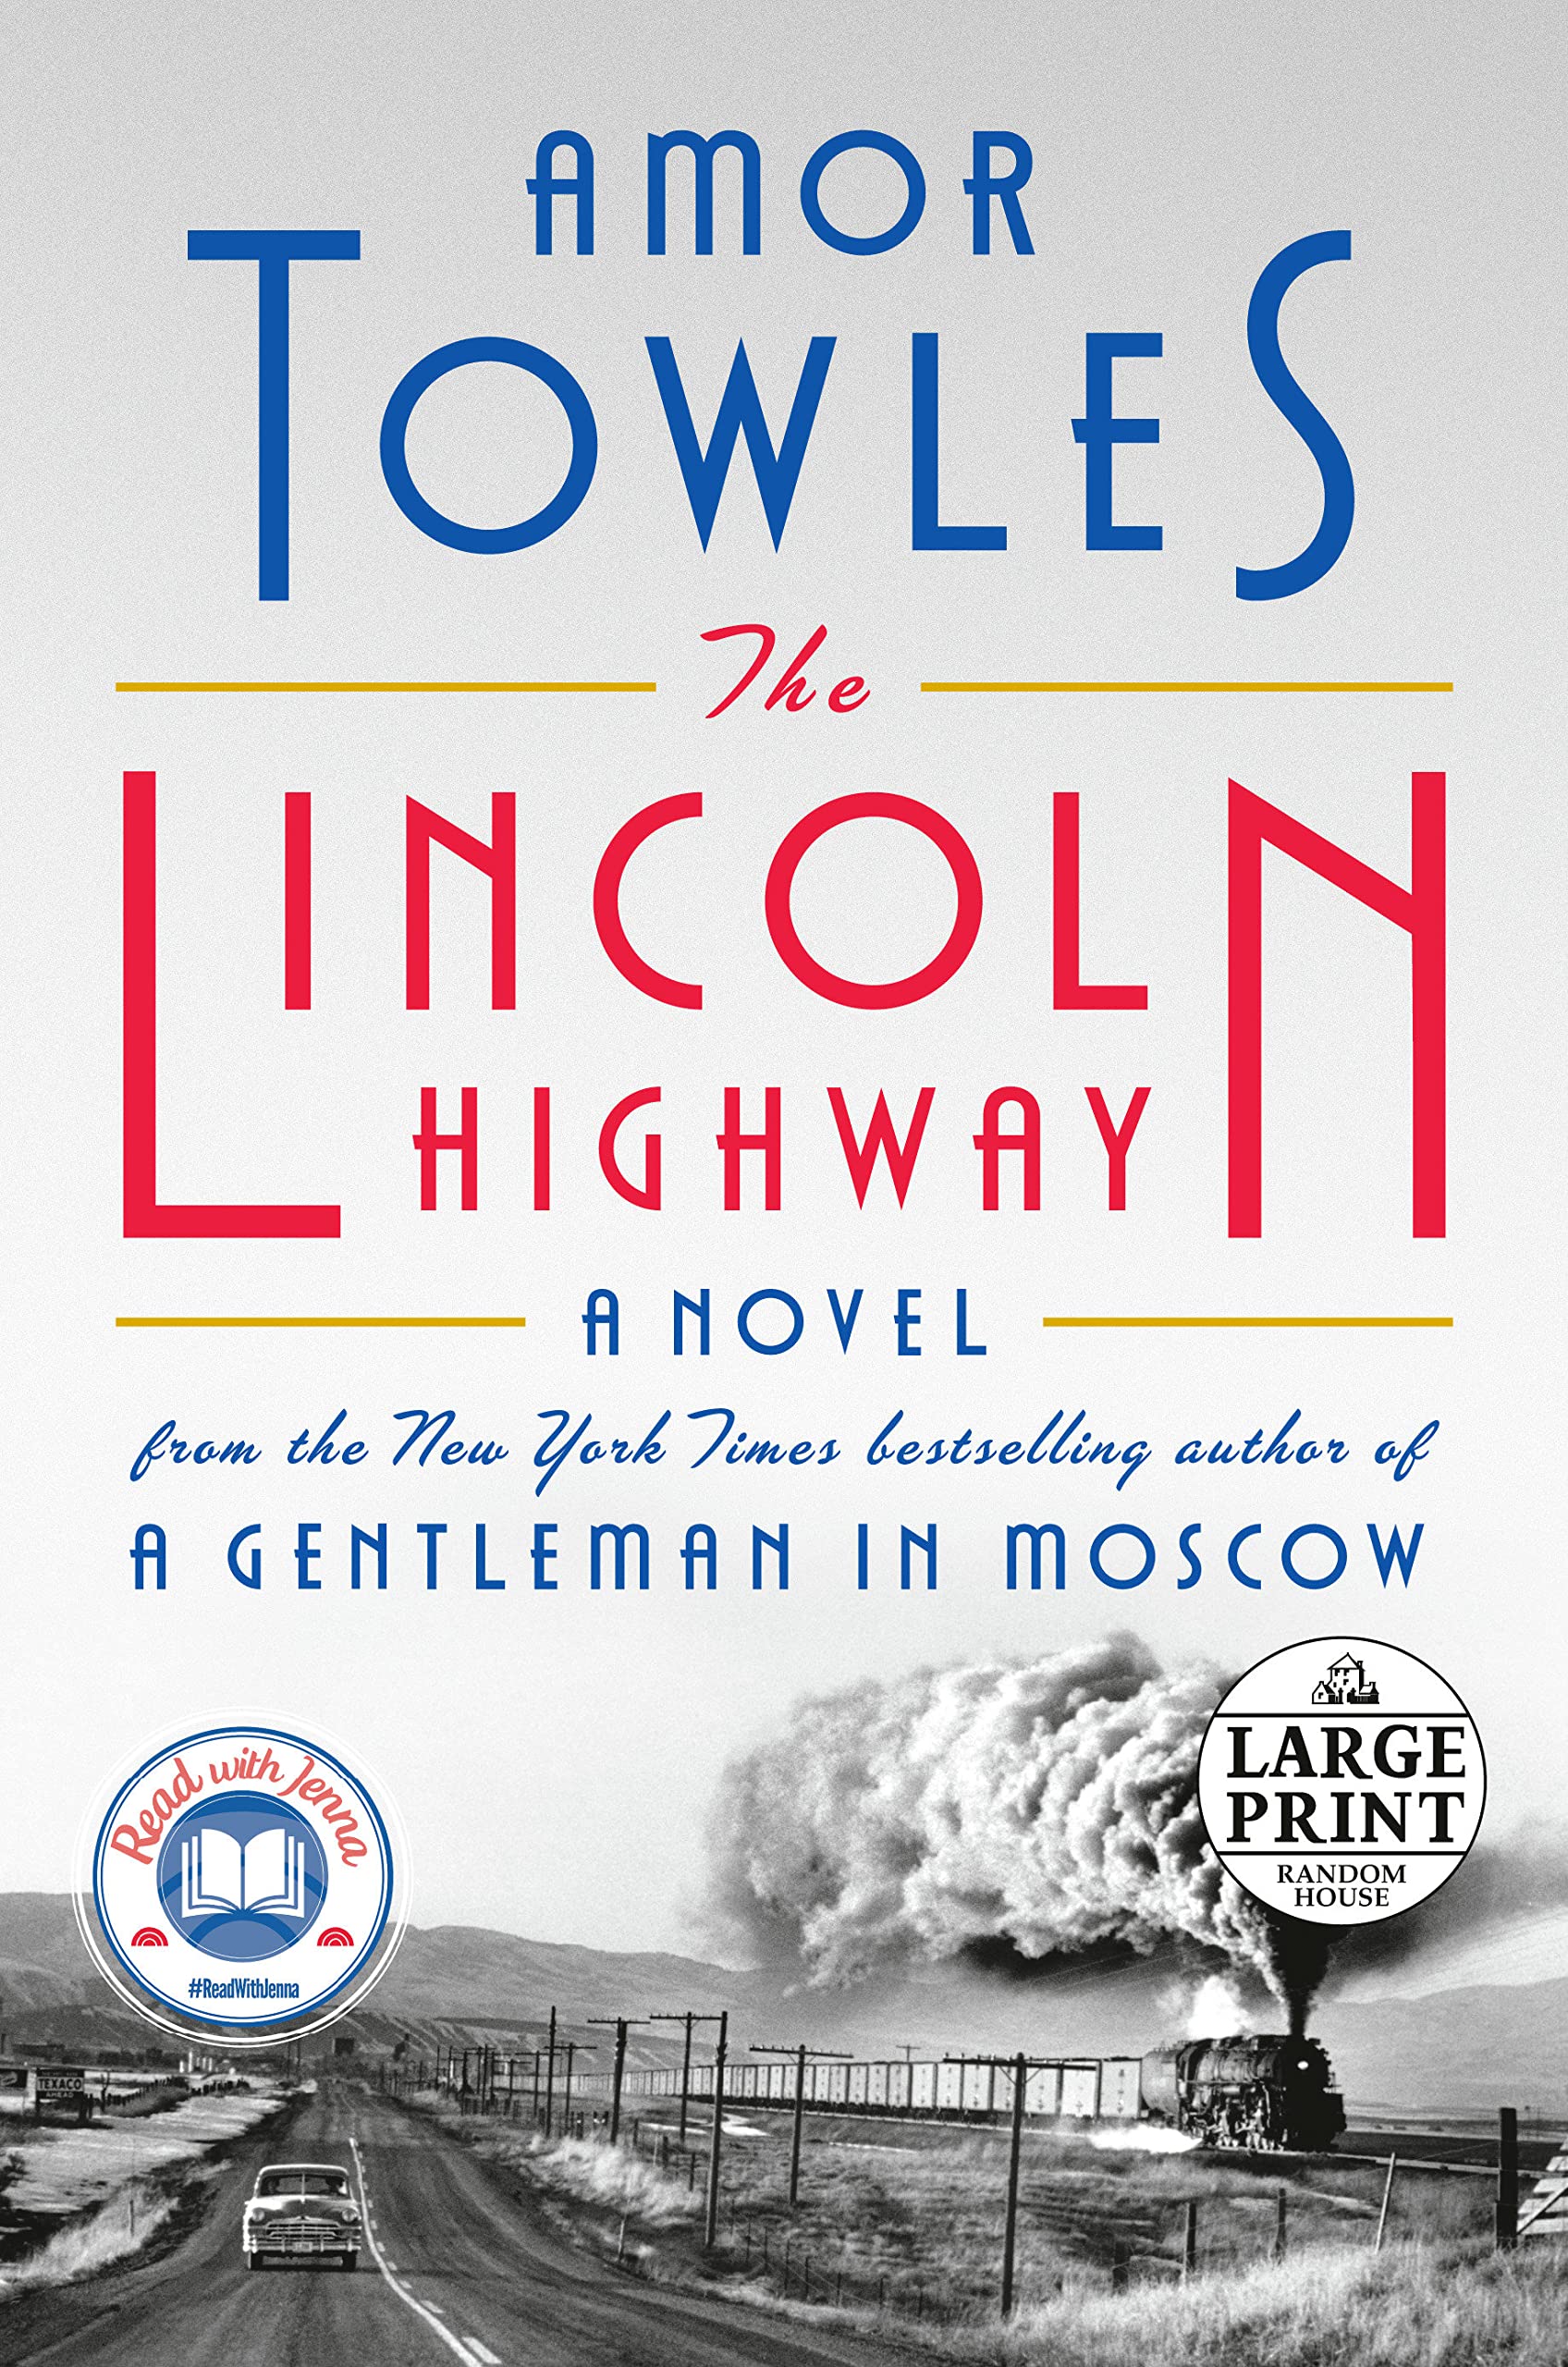 Graphic image of the cover of The Lincoln Highway